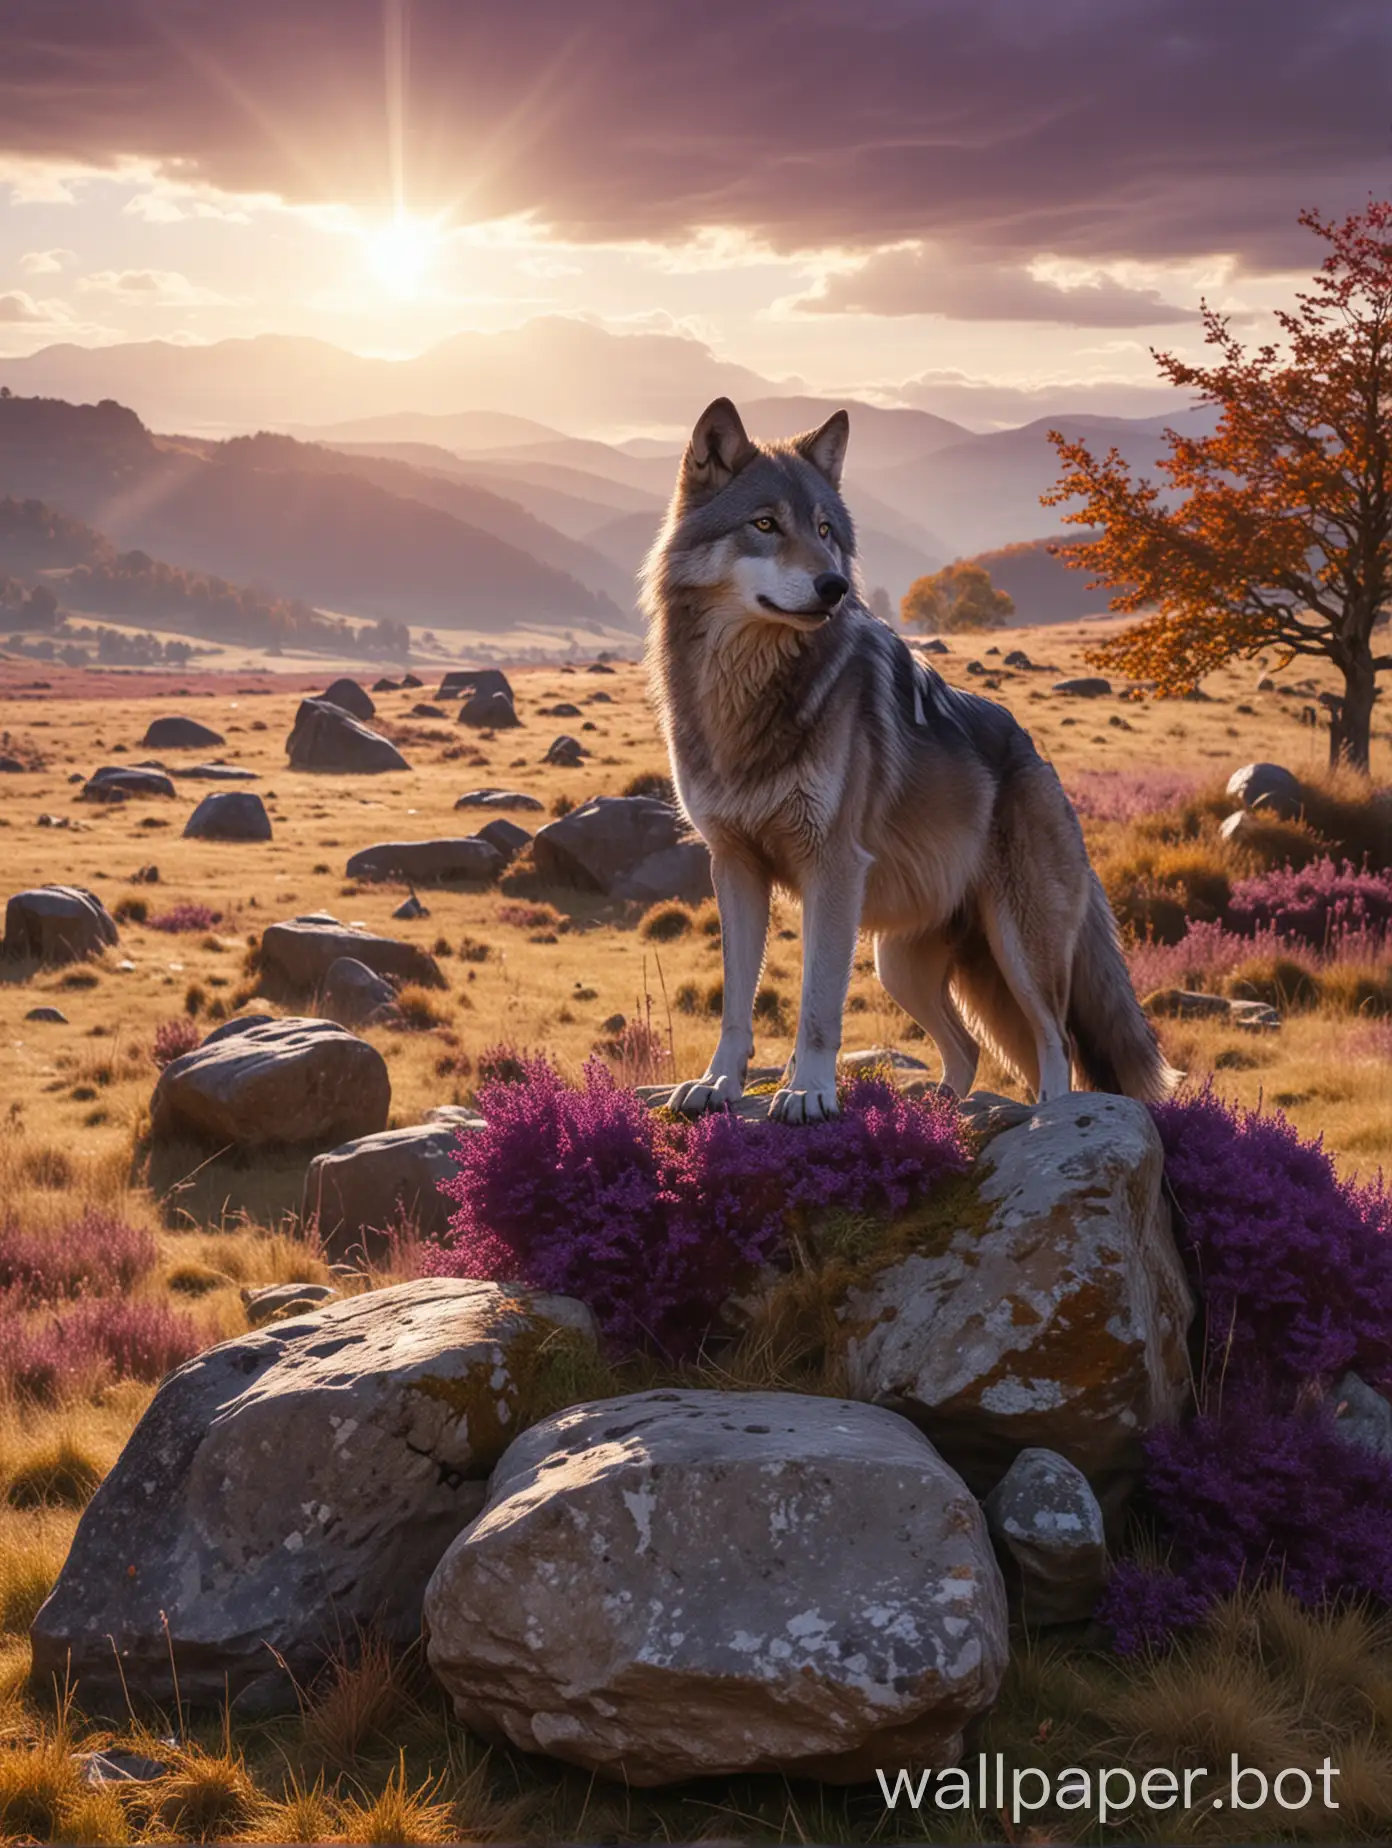 8k quality, wolf in varying shades of purple on a large boulder above a grassland valley on a sunny autumn day with rays of light